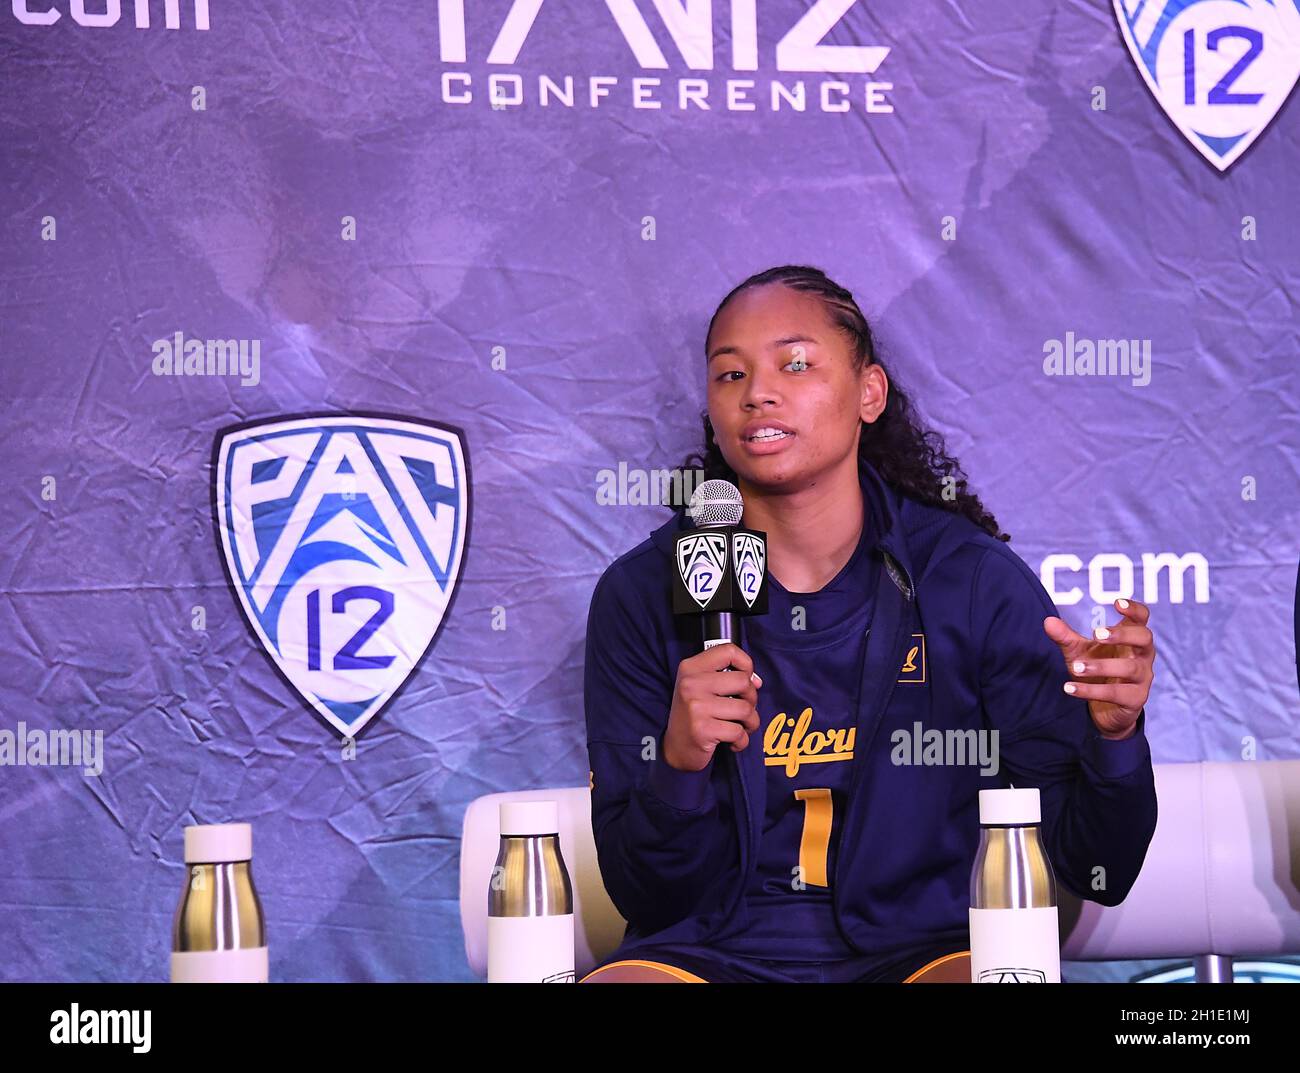 Cal Bears player Leilani McIntosh answering questions from the media during Pac-12 women's basketball media day, Tuesday, Oct. 12, 2021, in San Franci Stock Photo